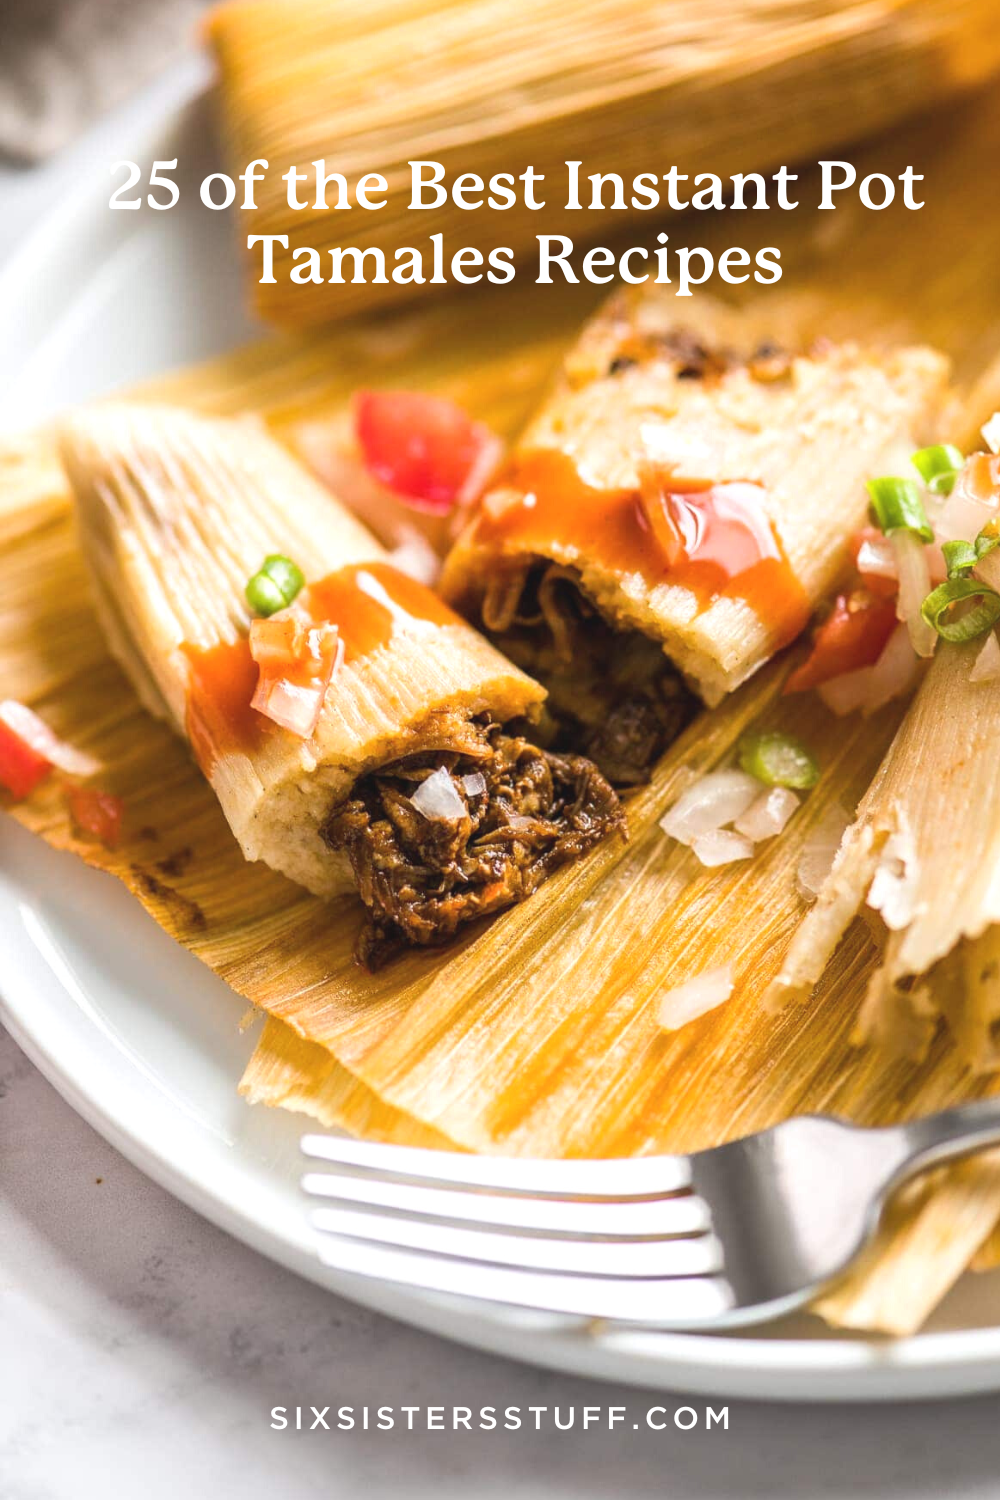 25 of the Best Instant Pot Tamales Recipes